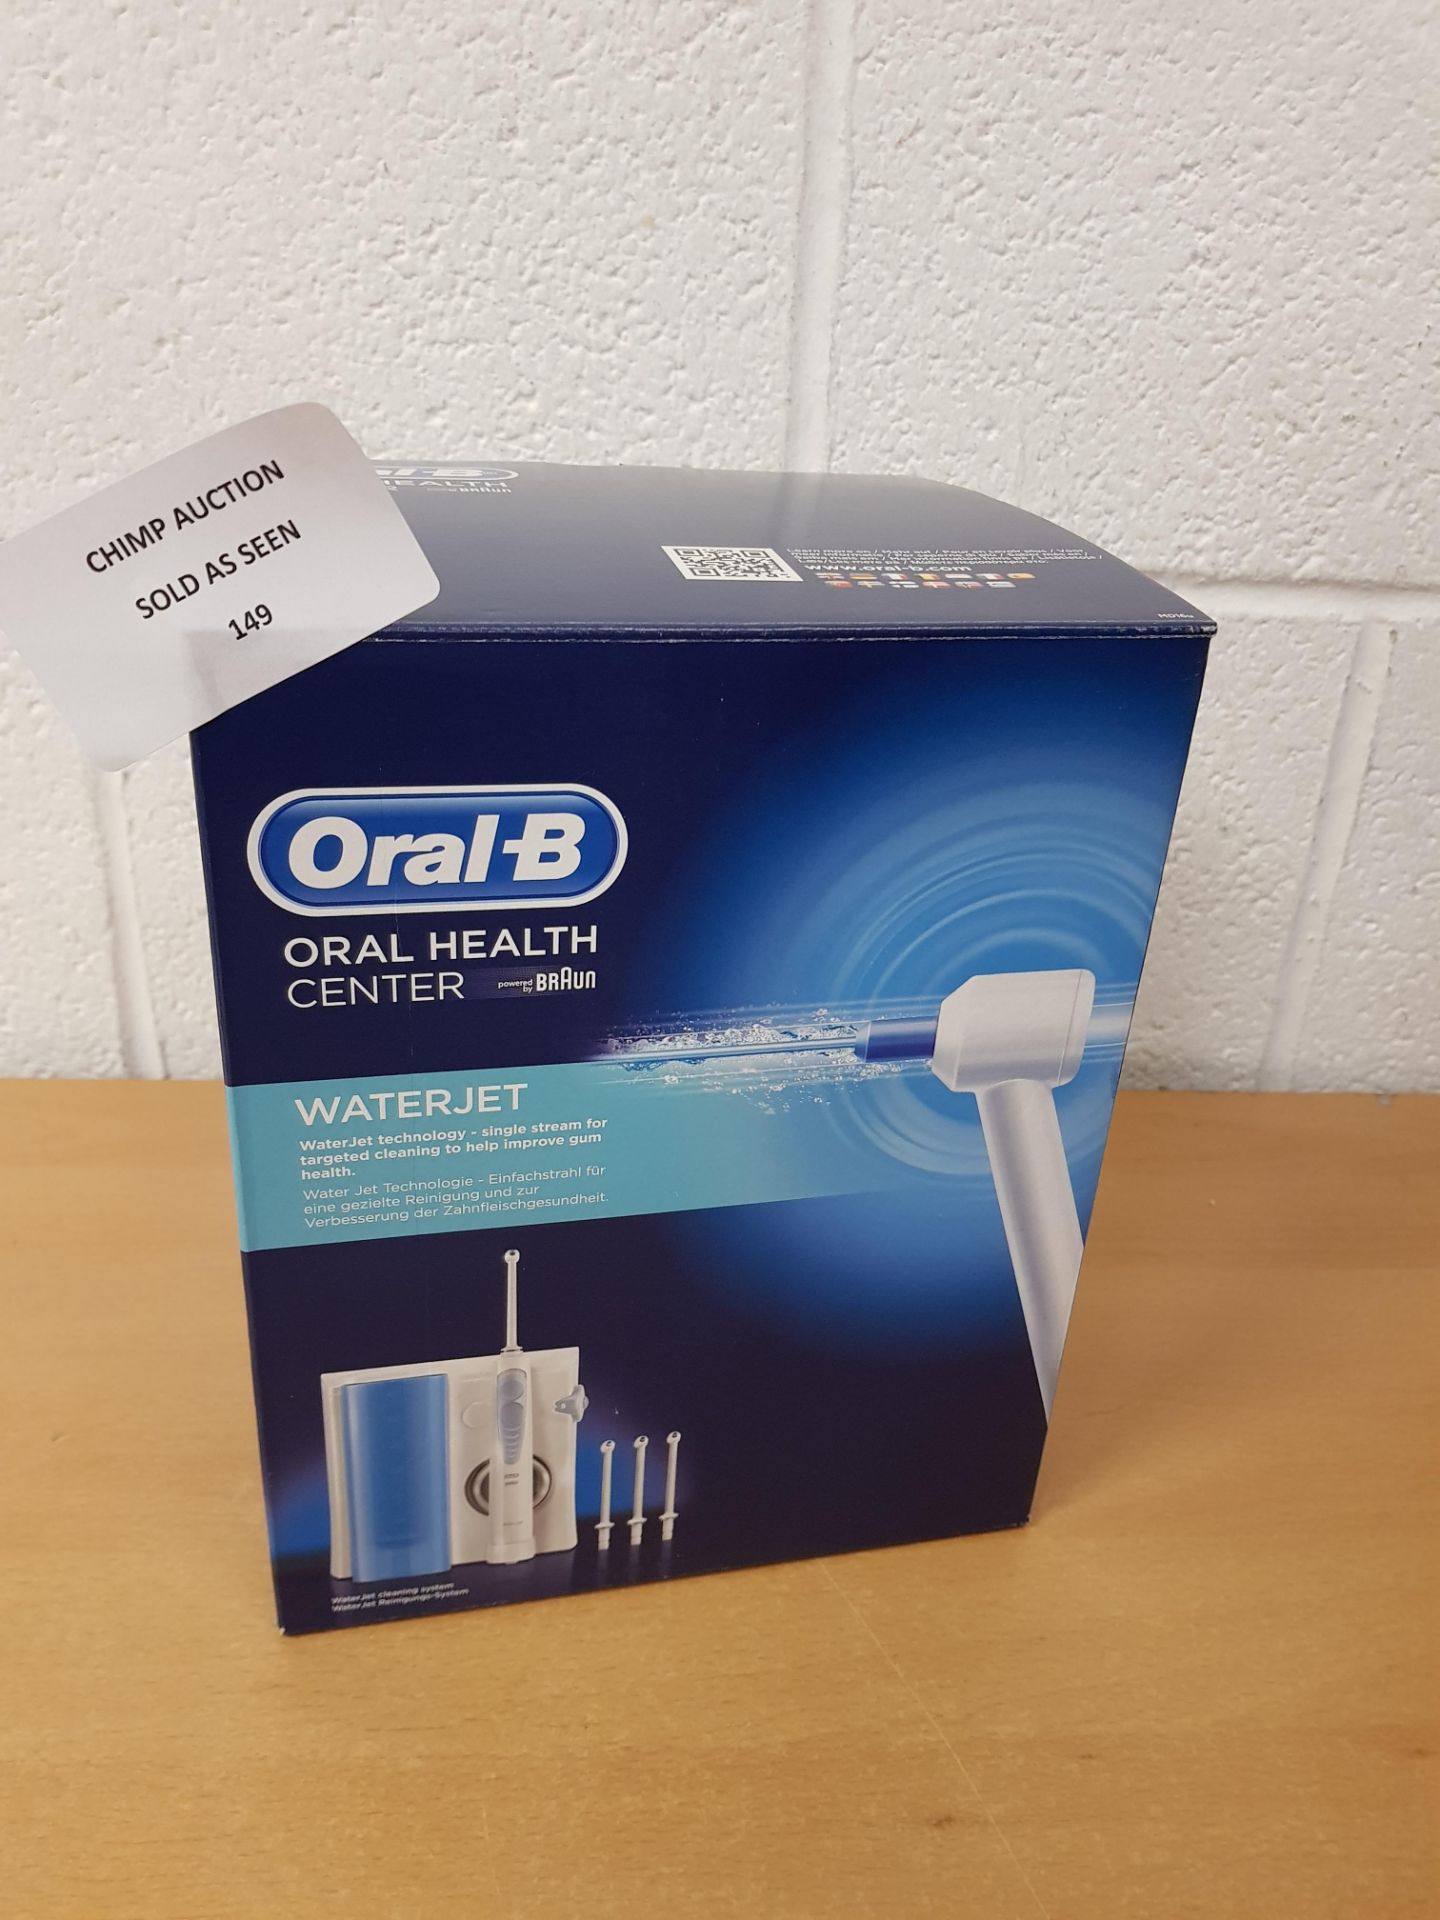 Oral-B Water Jet Oral Irrigator Cleaning System RRP £79.99.